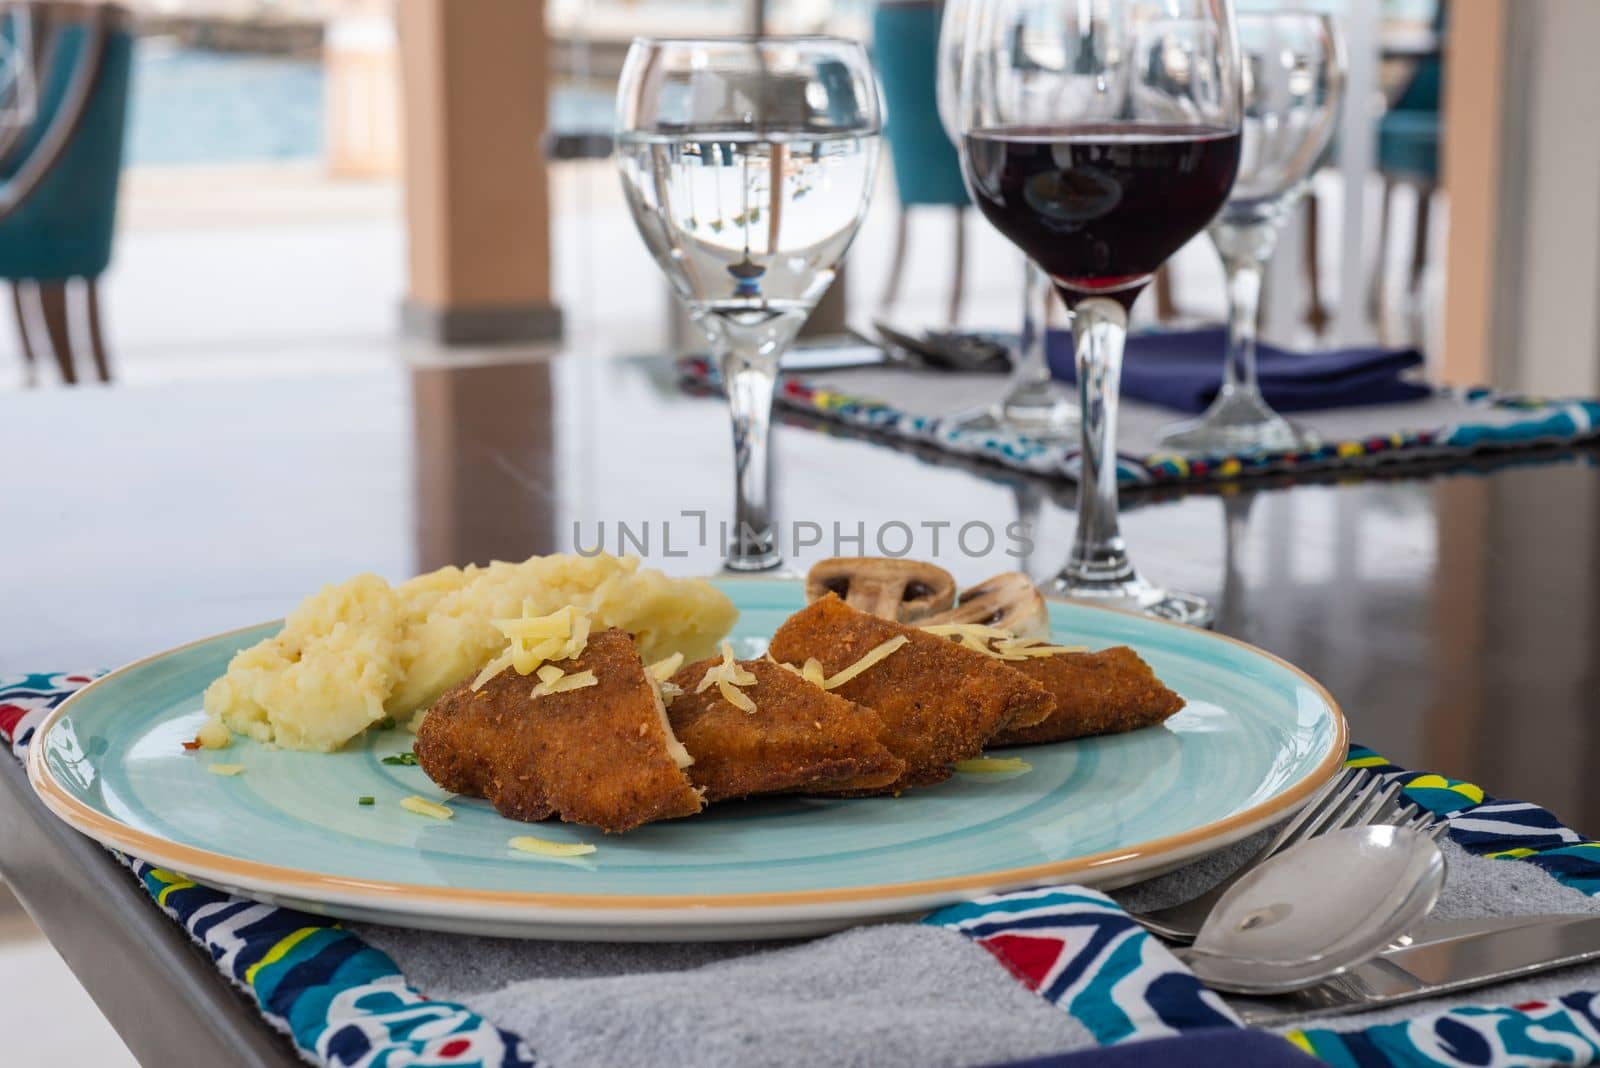 Stuffed chicken panne a la carte meal with mashed potato by paulvinten